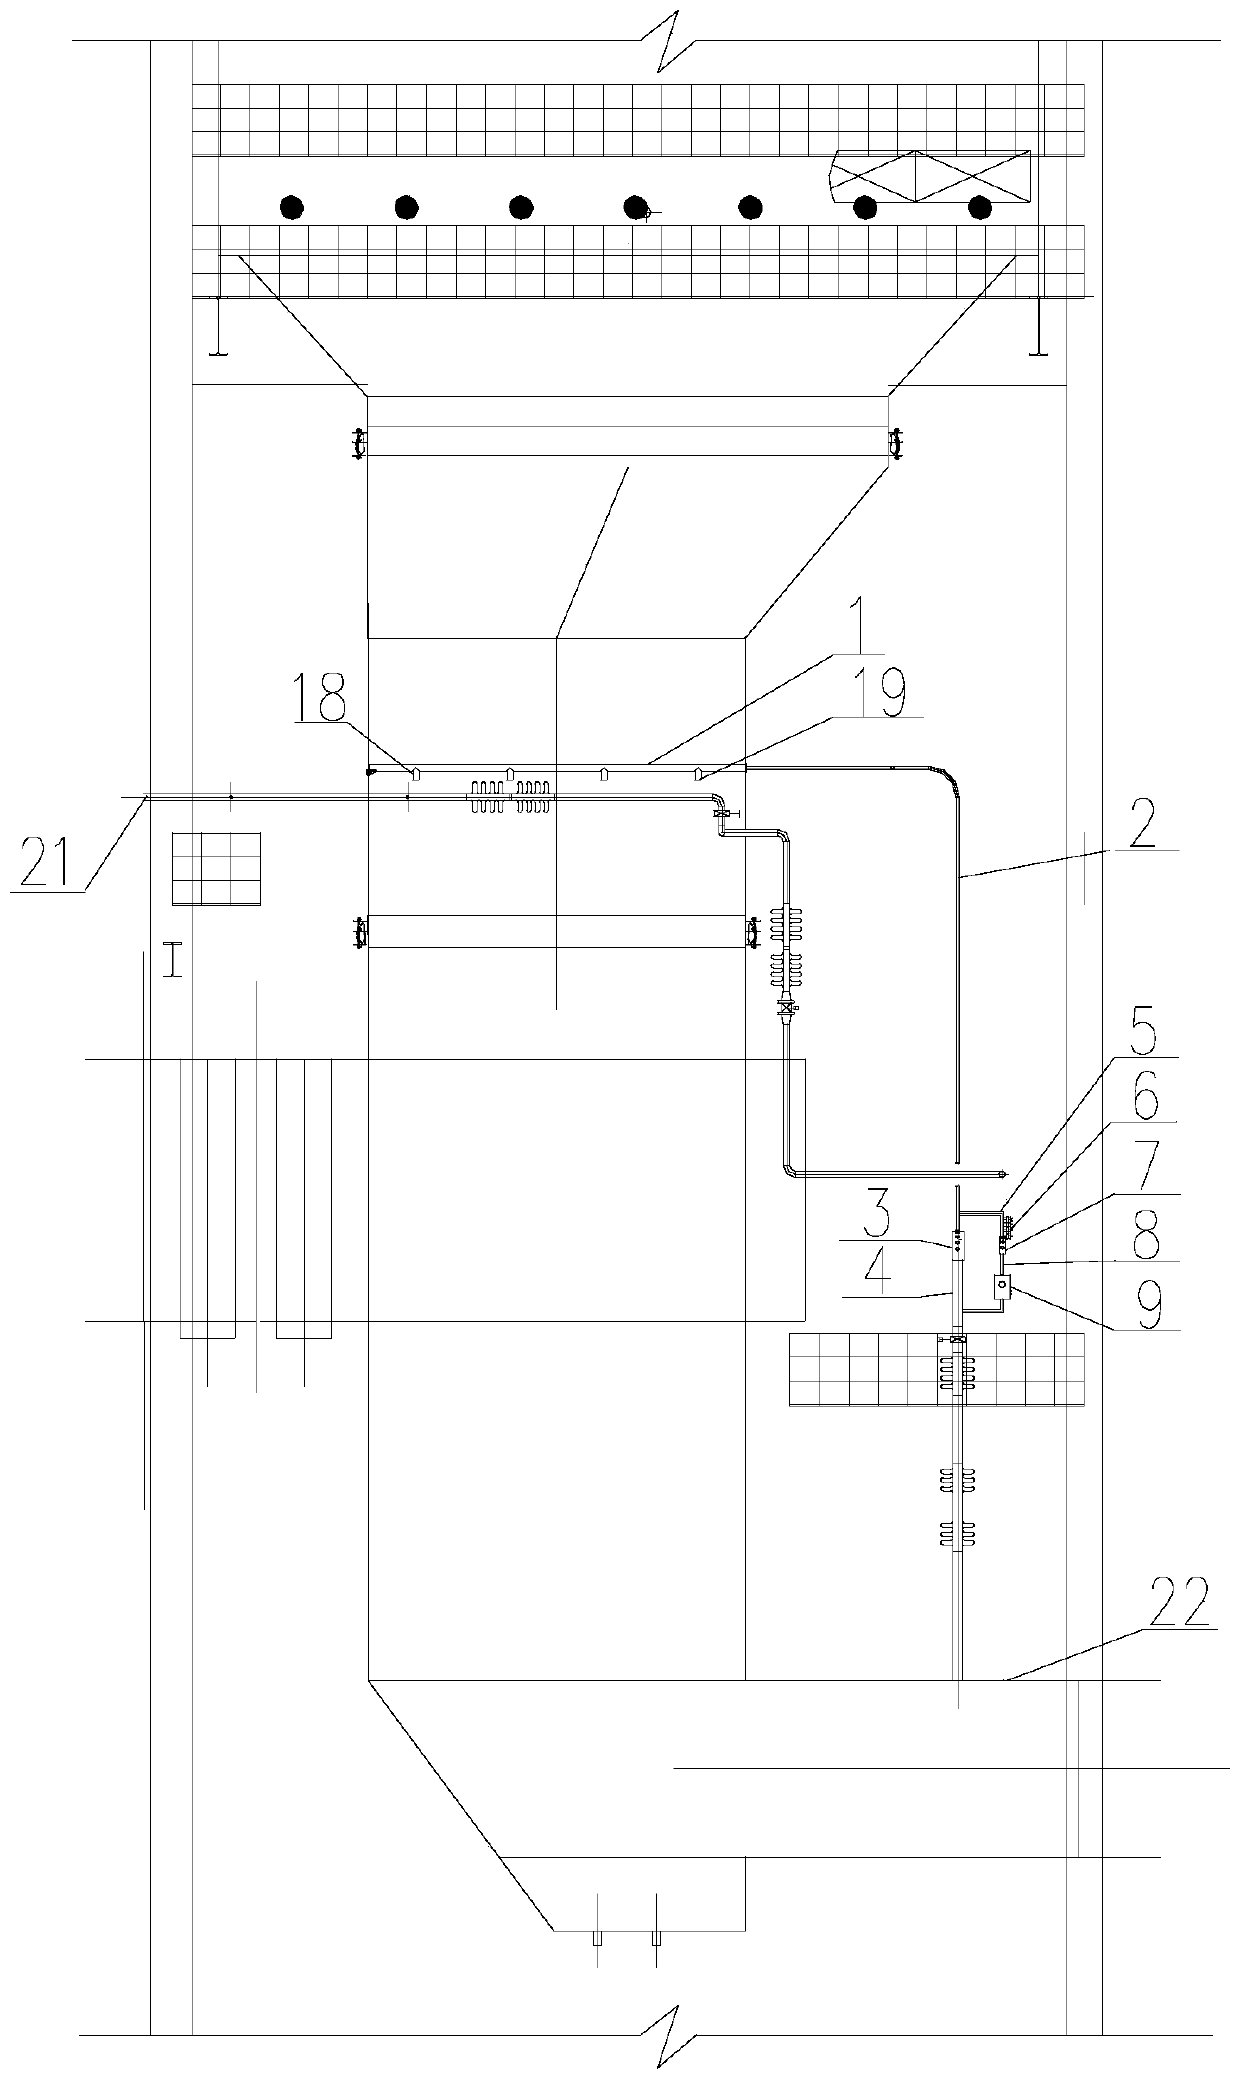 Precise ammonia spraying device and method for thermal power plant denitration SCR reactors